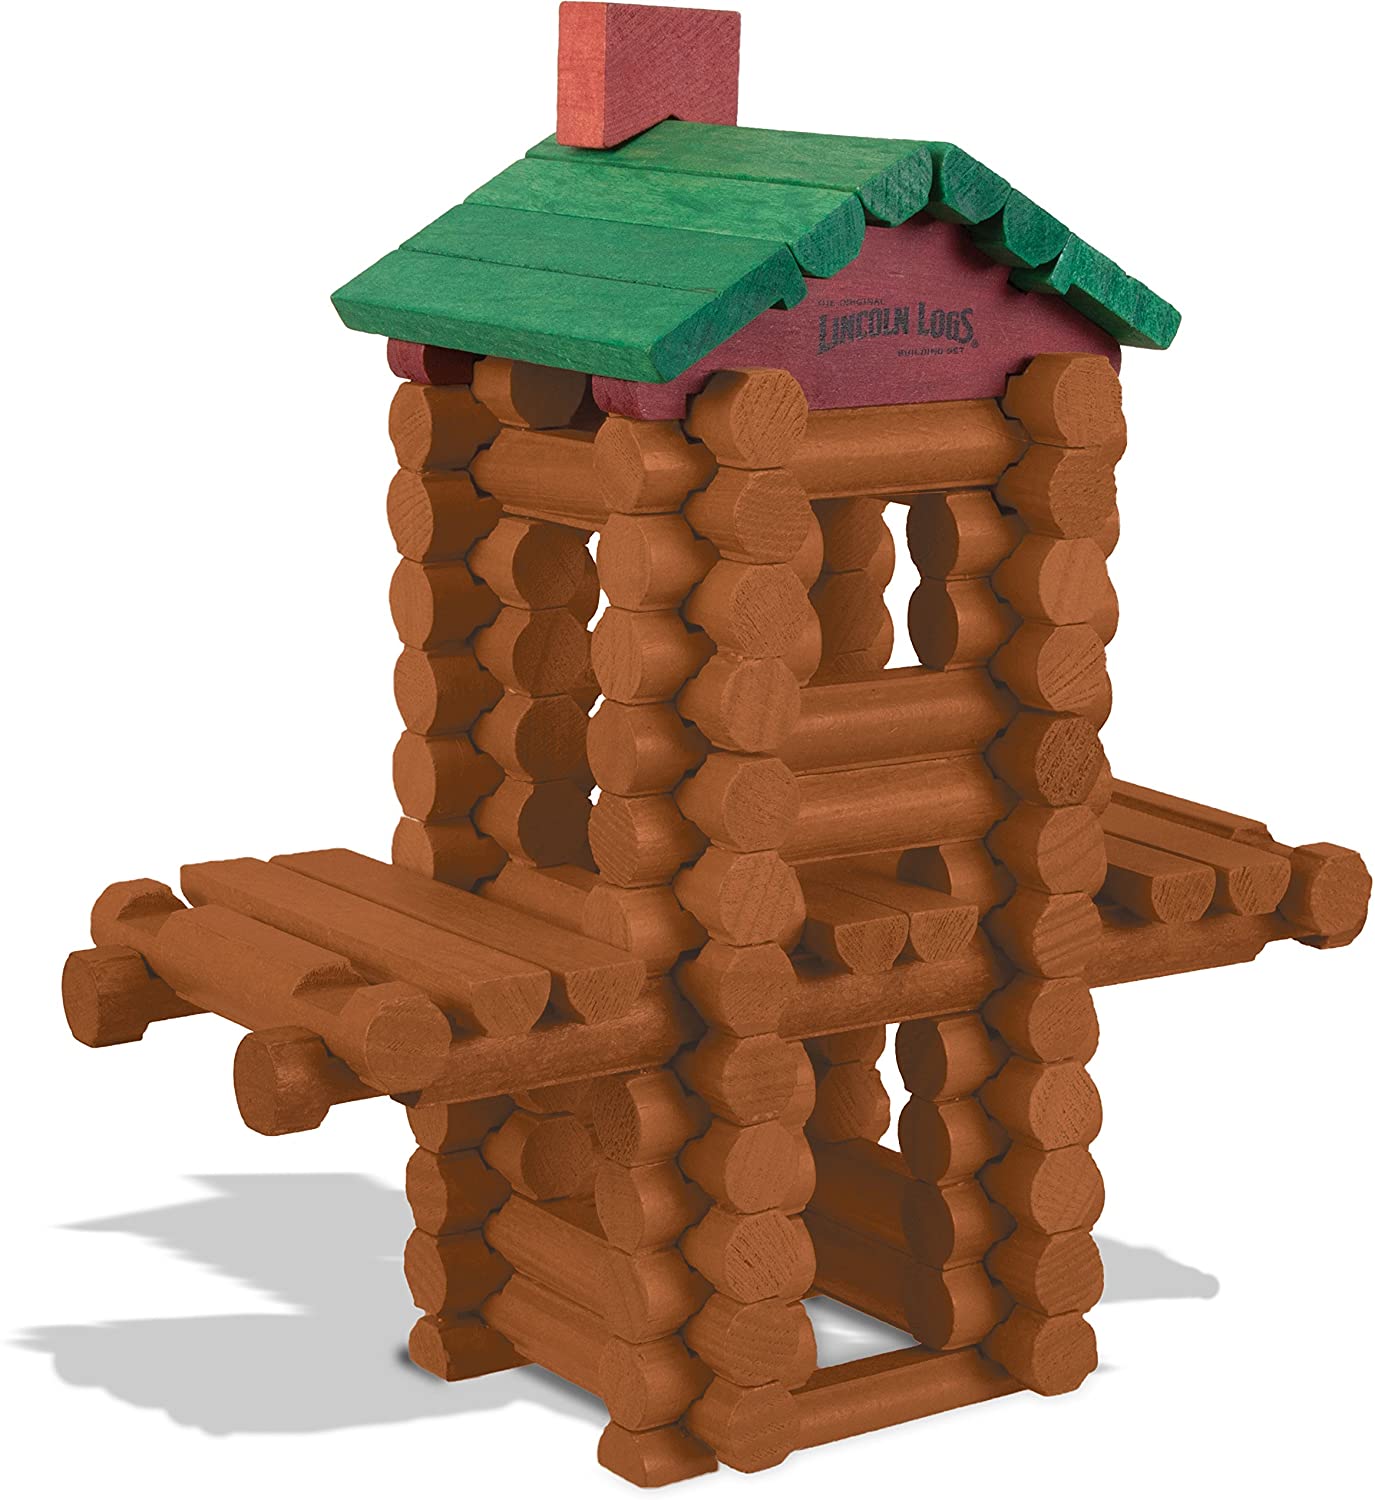 Lincoln Logs, a popular children&#39;s toy